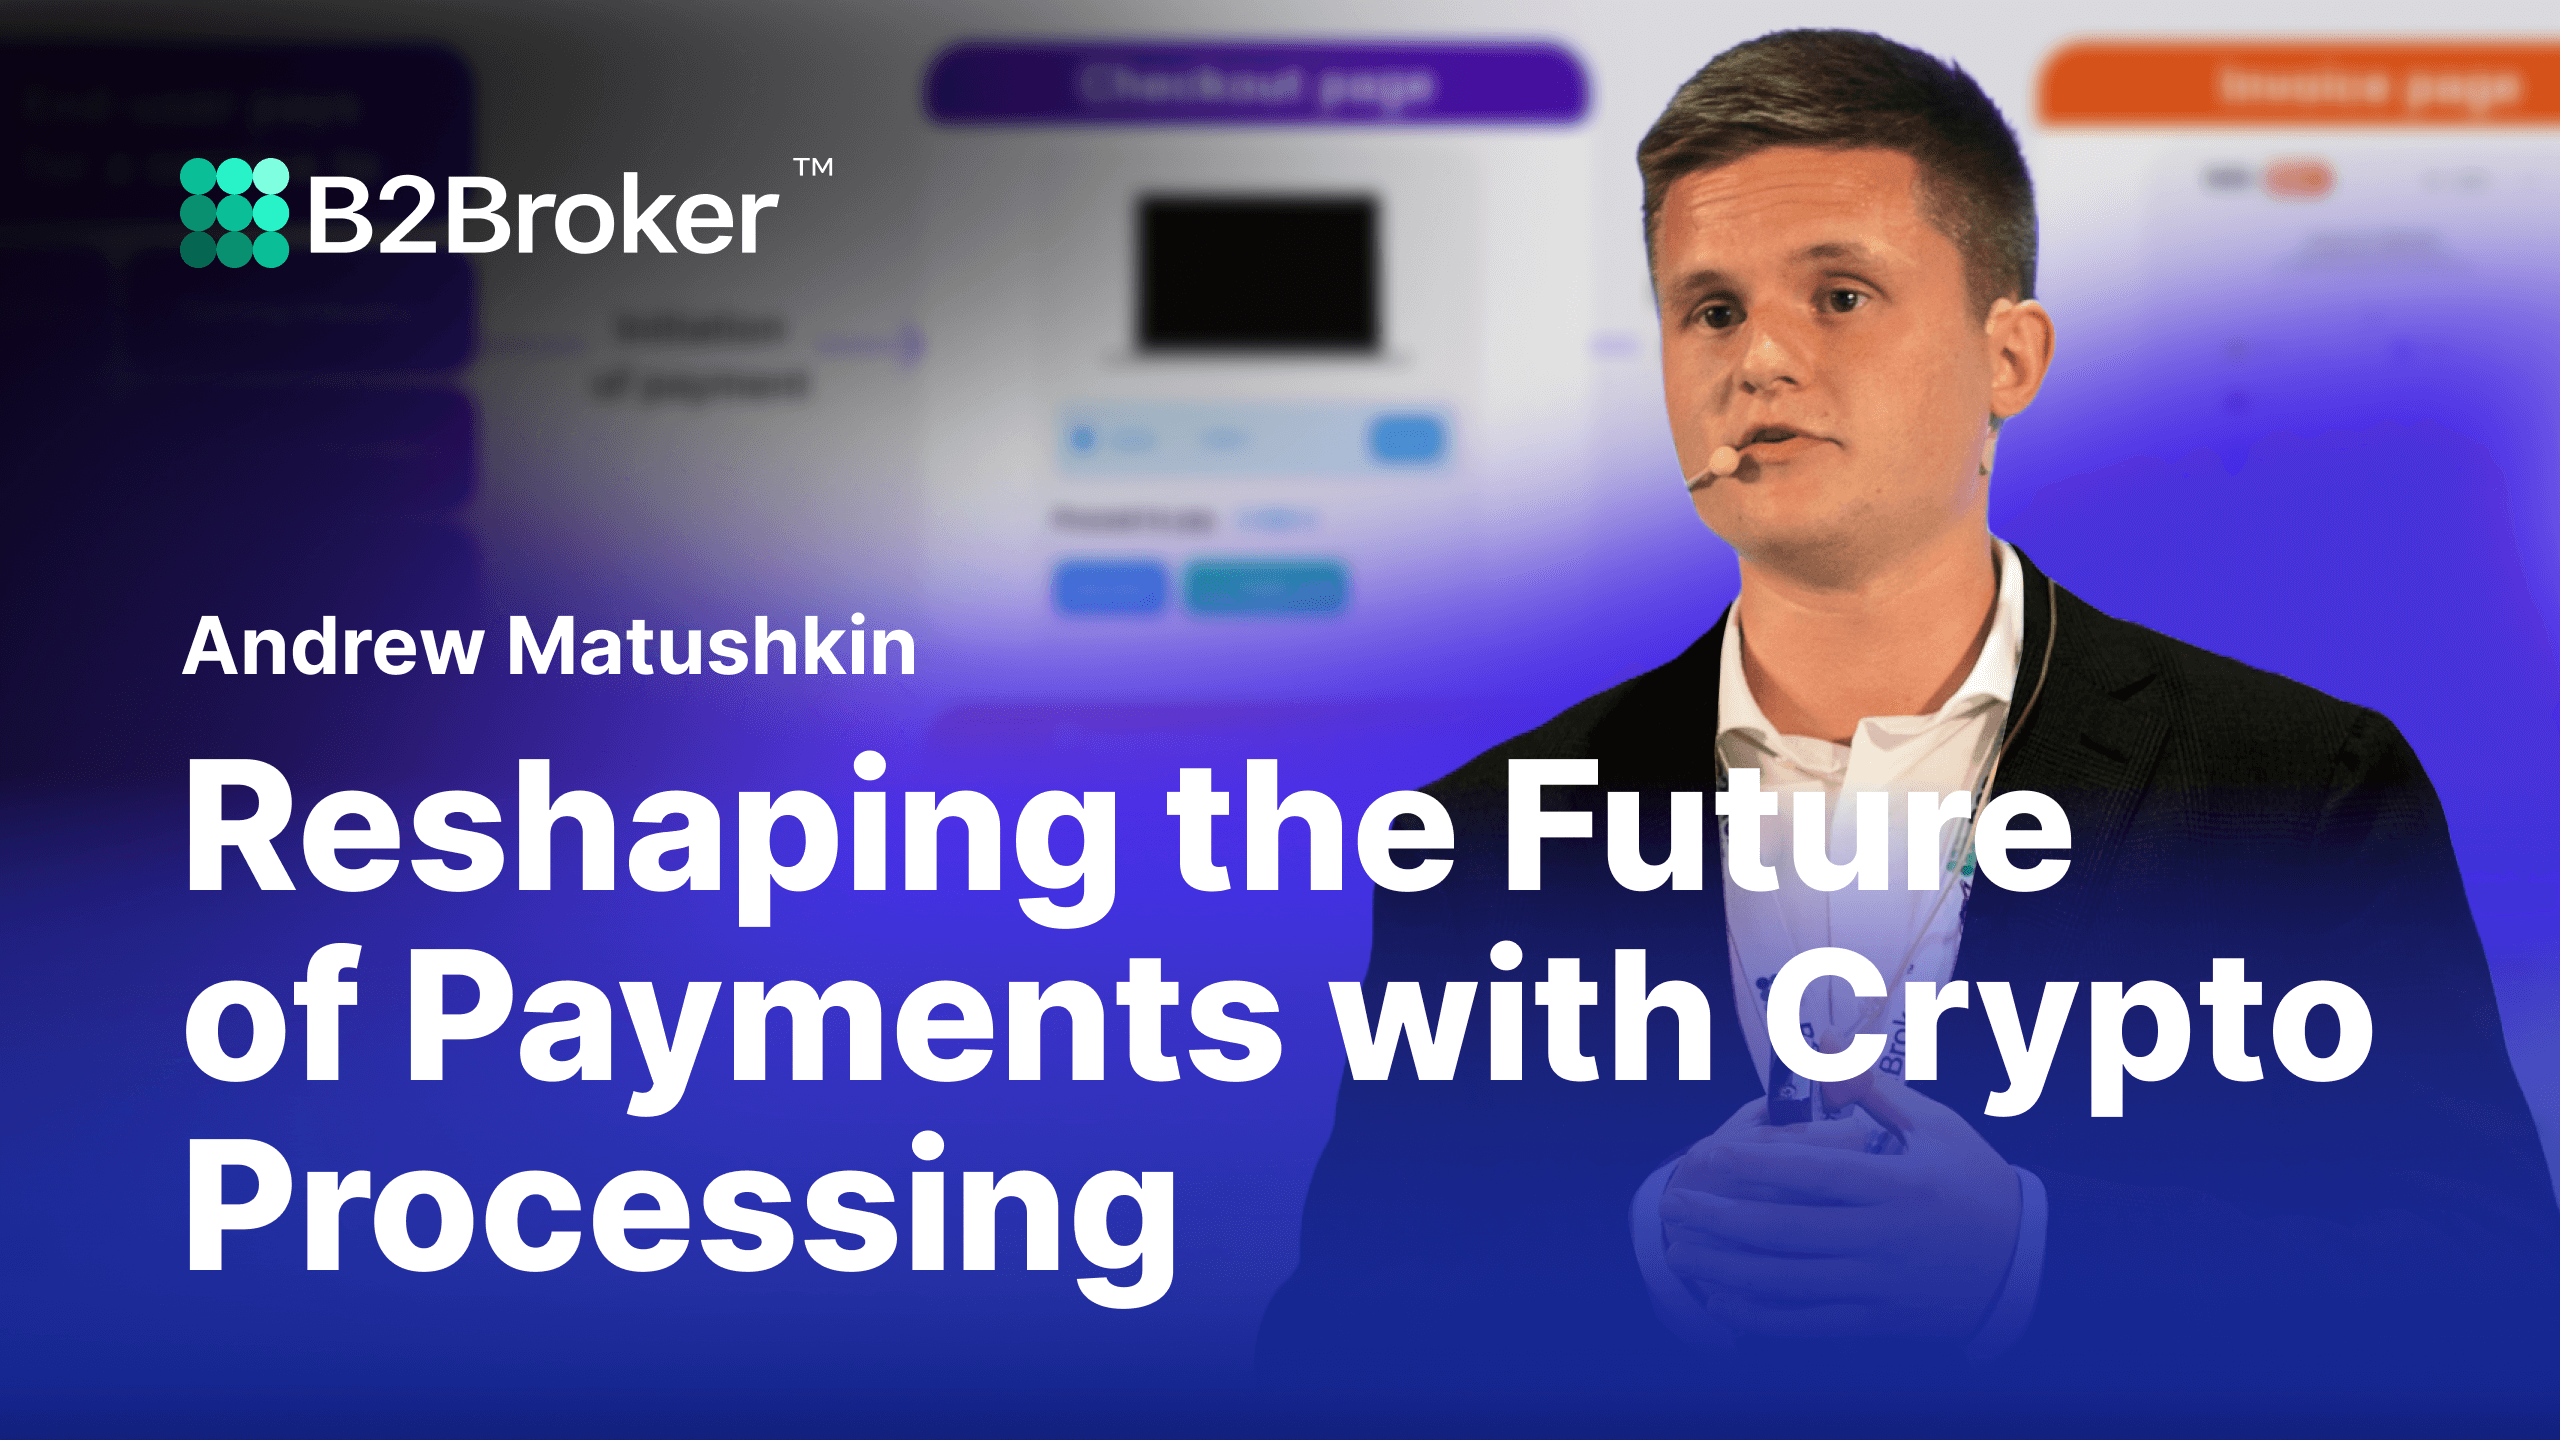 Reshaping the Future of Payments with Crypto Processing